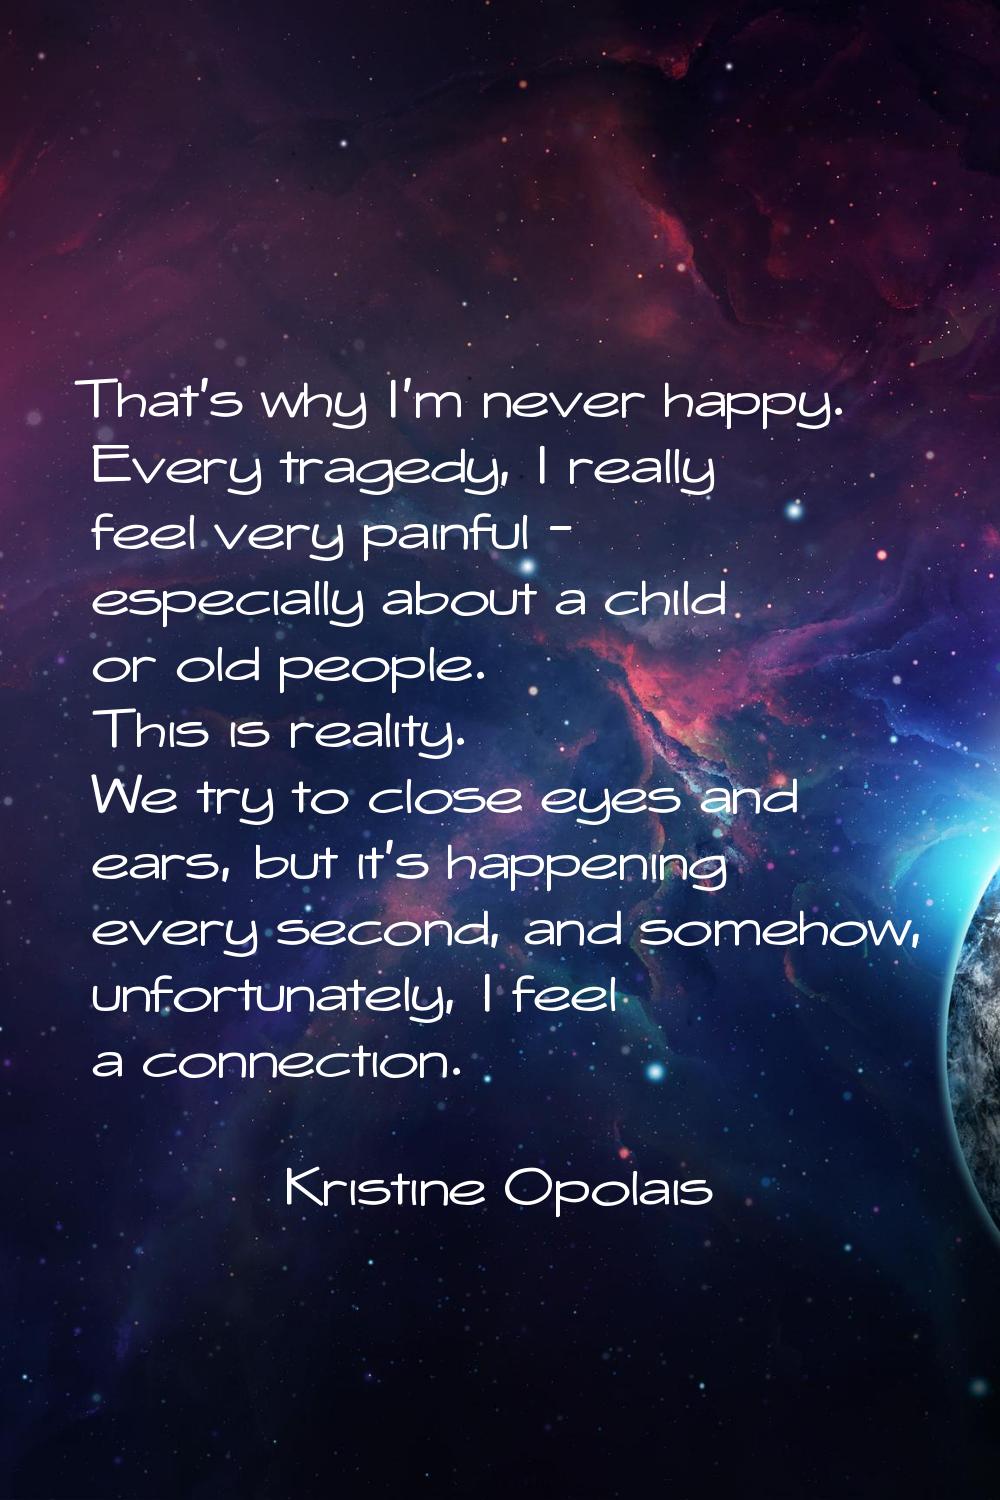 That's why I'm never happy. Every tragedy, I really feel very painful - especially about a child or